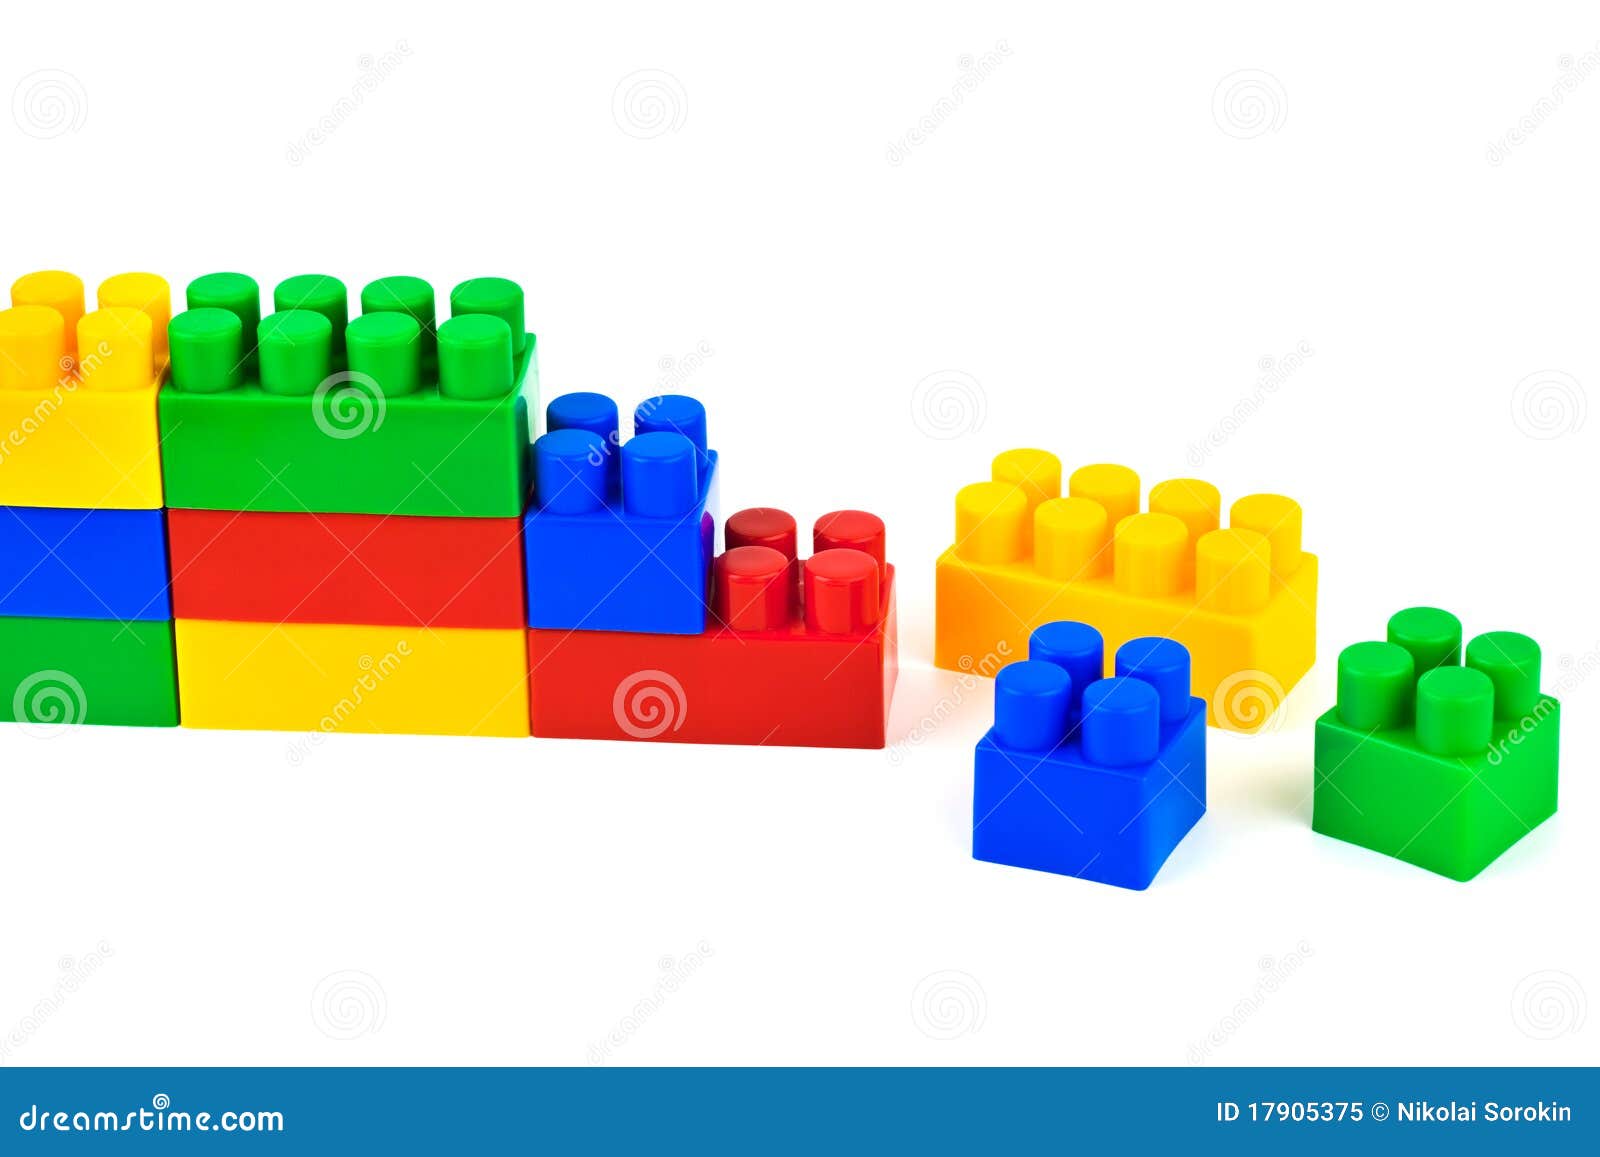 Toy blocks stock image. Image of constructor, built, exterior - 17905375